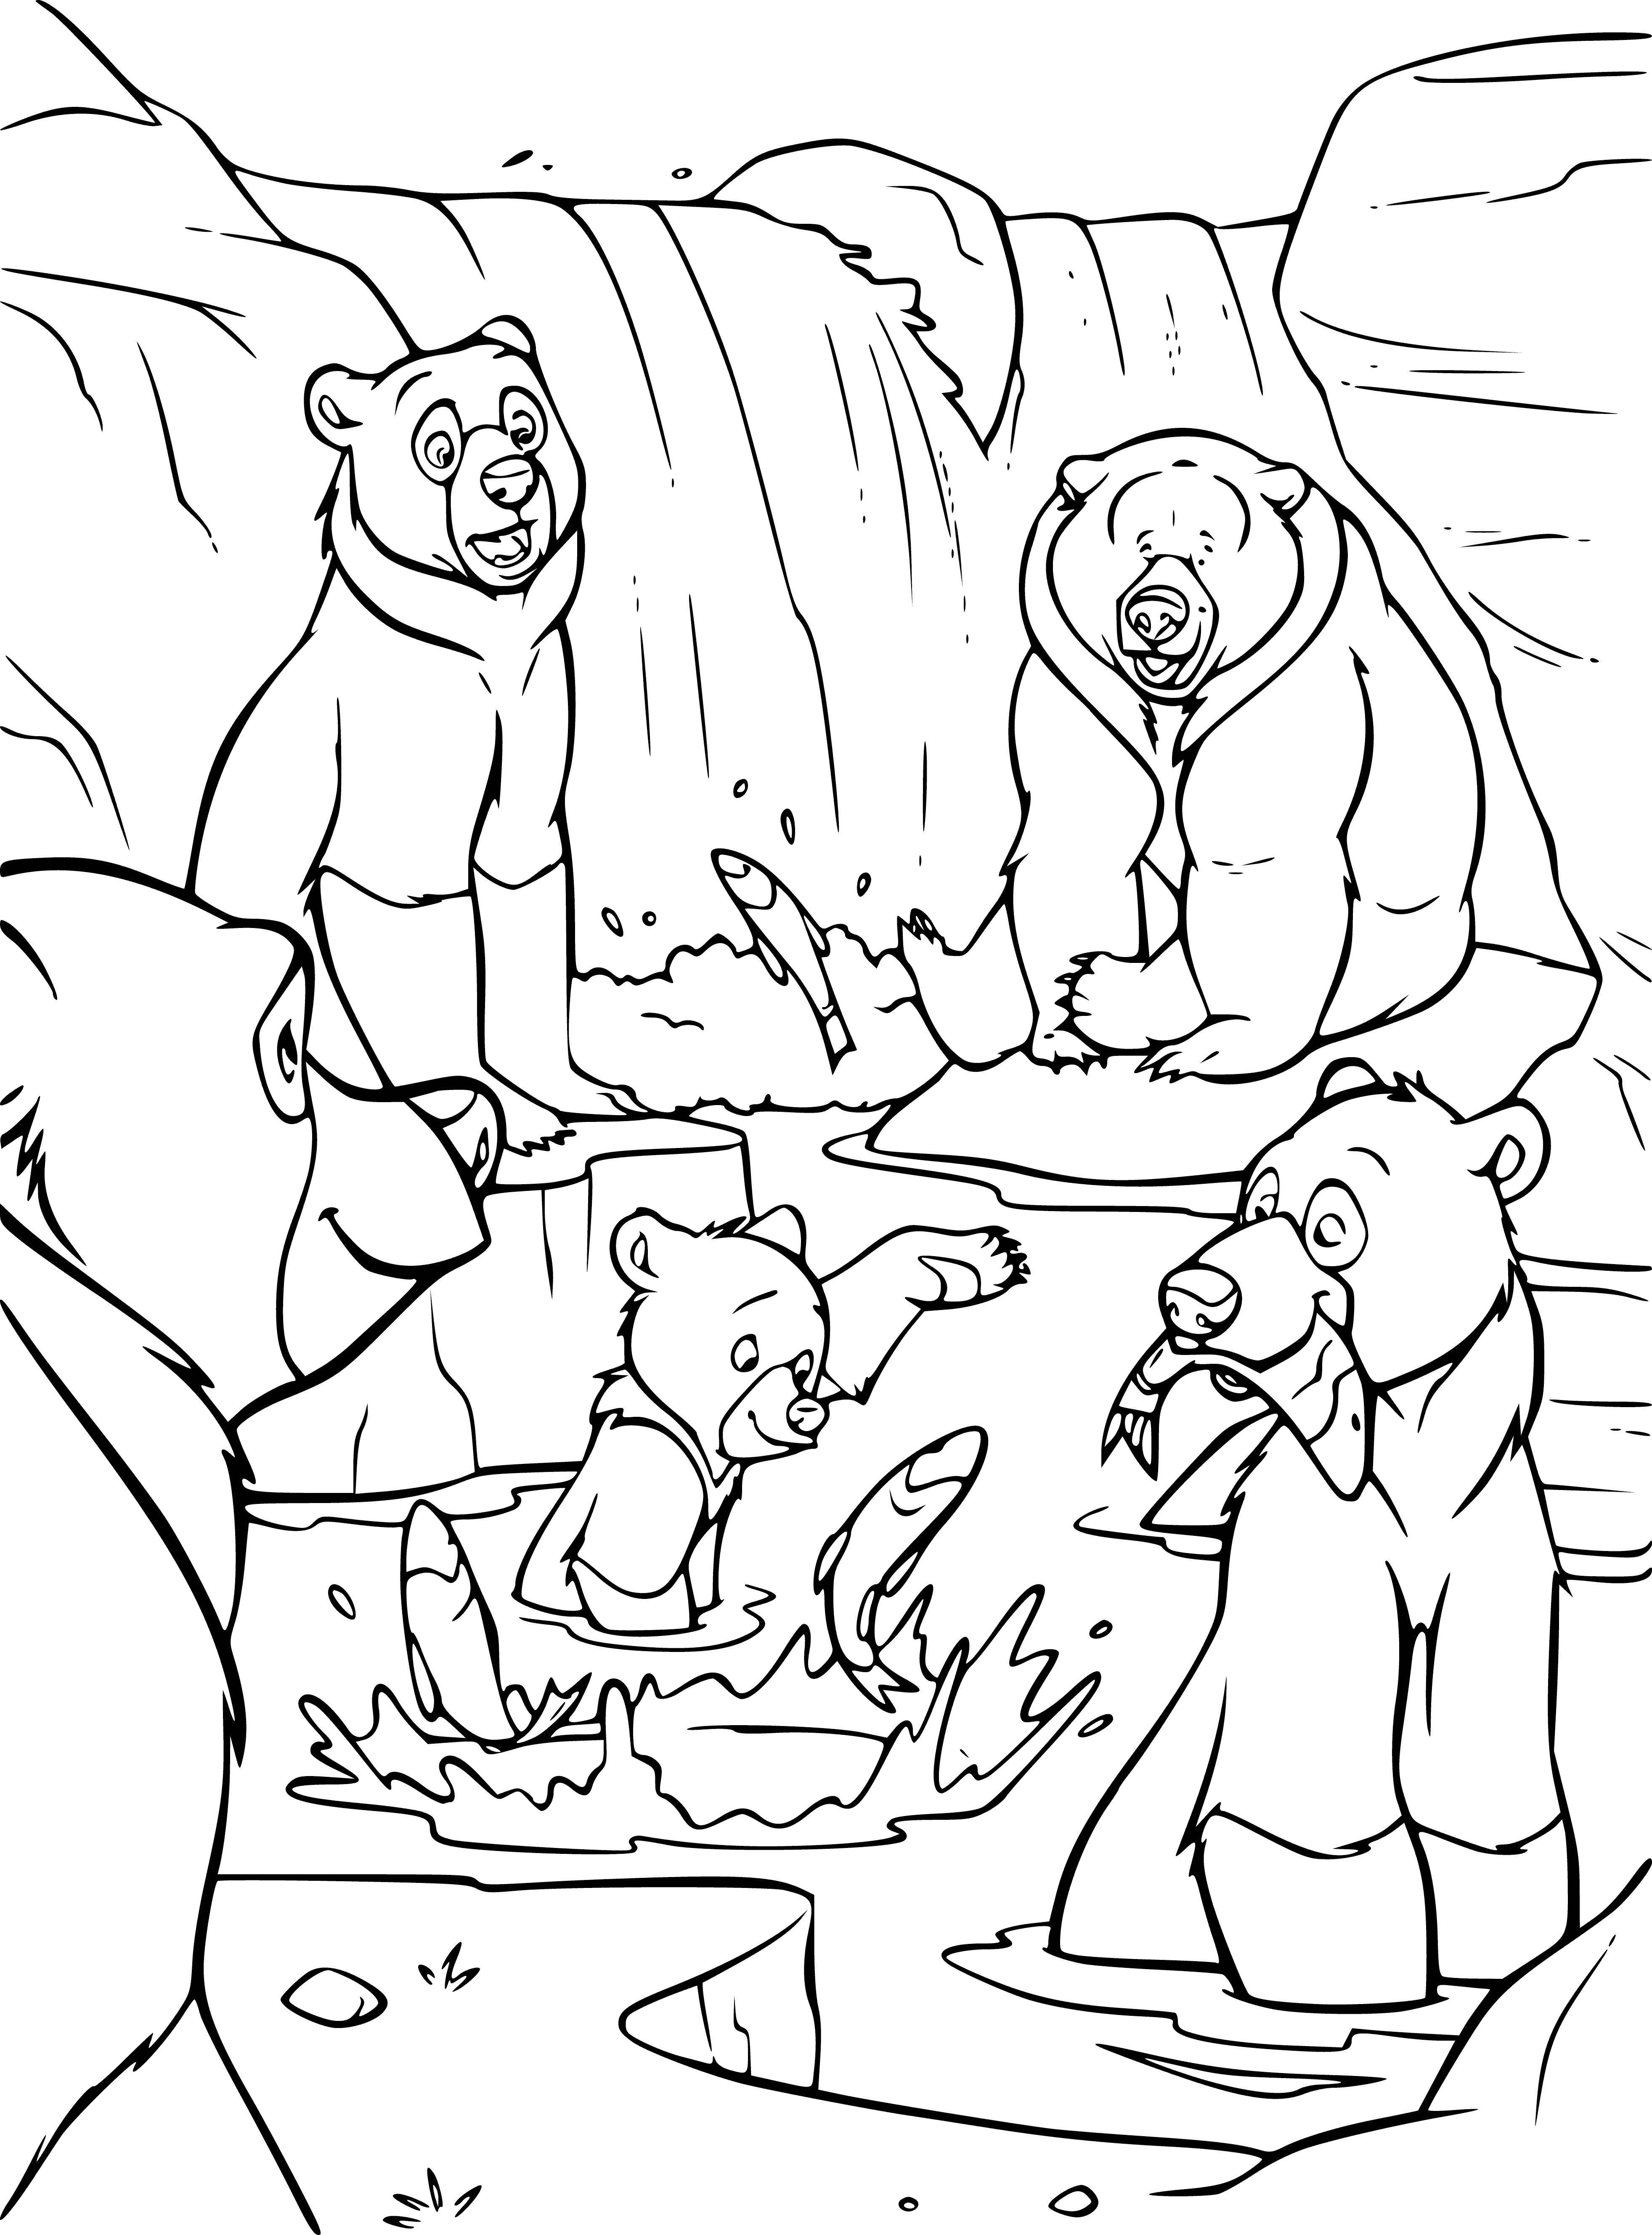 The Bears coloring page